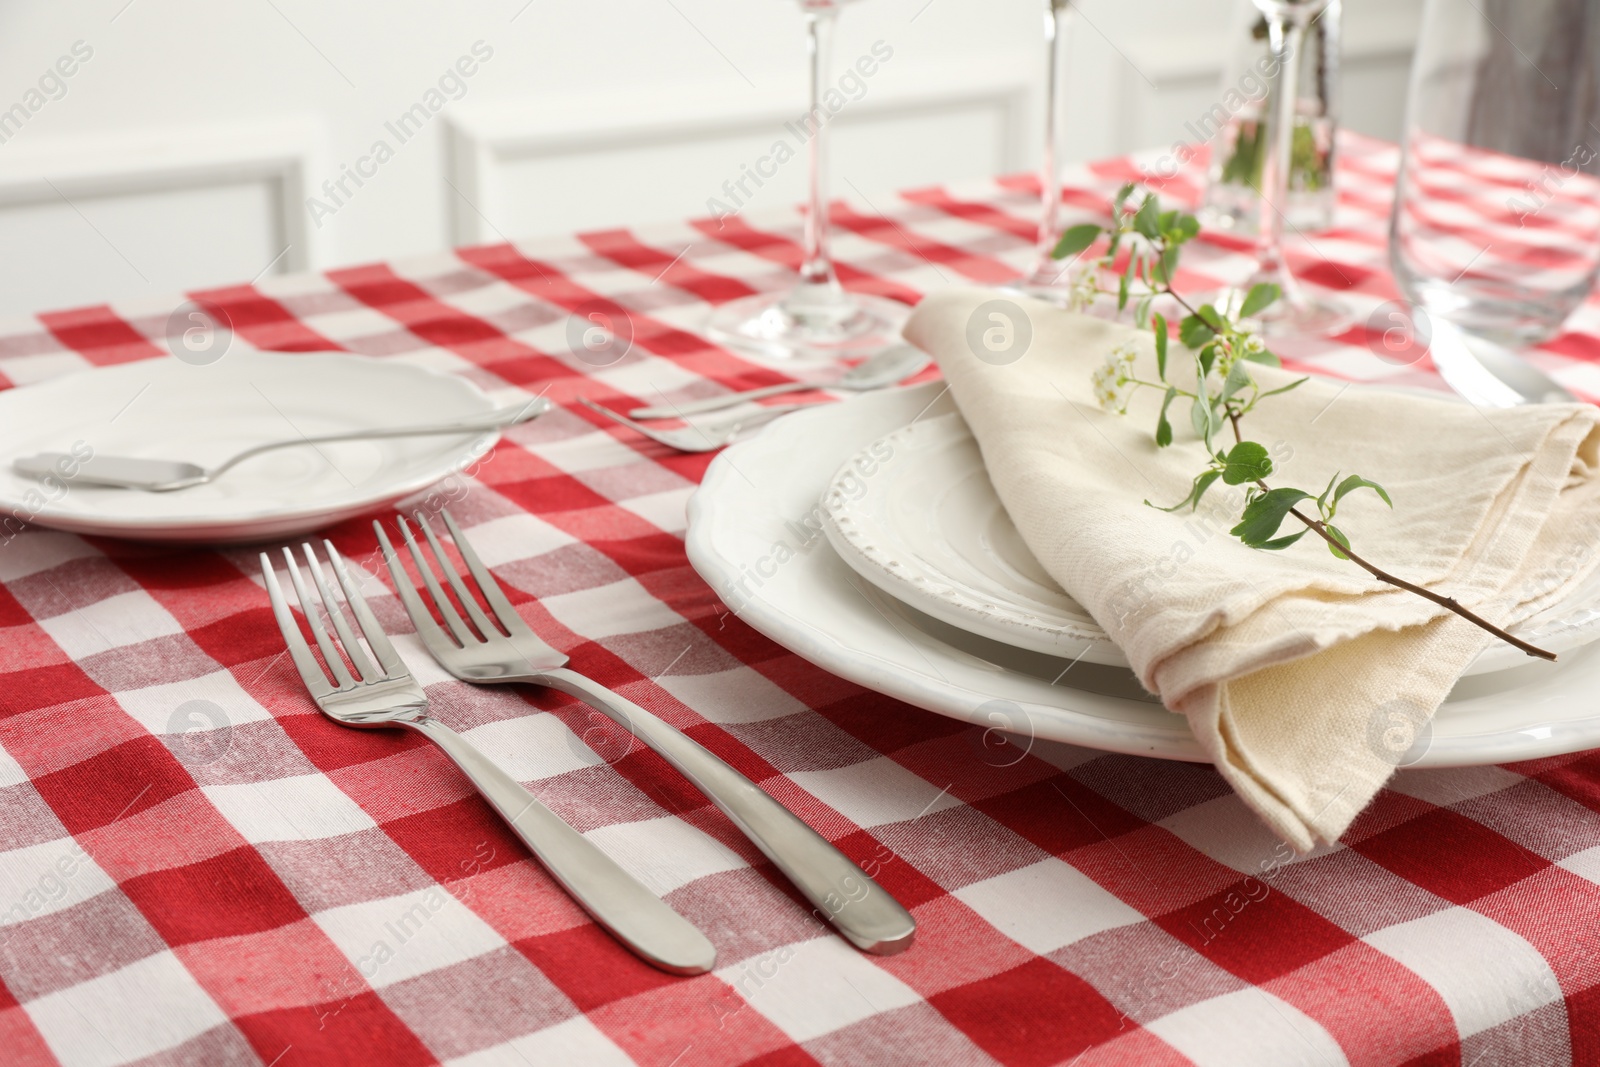 Photo of Stylish setting with cutlery, plates, napkin and floral decor on table